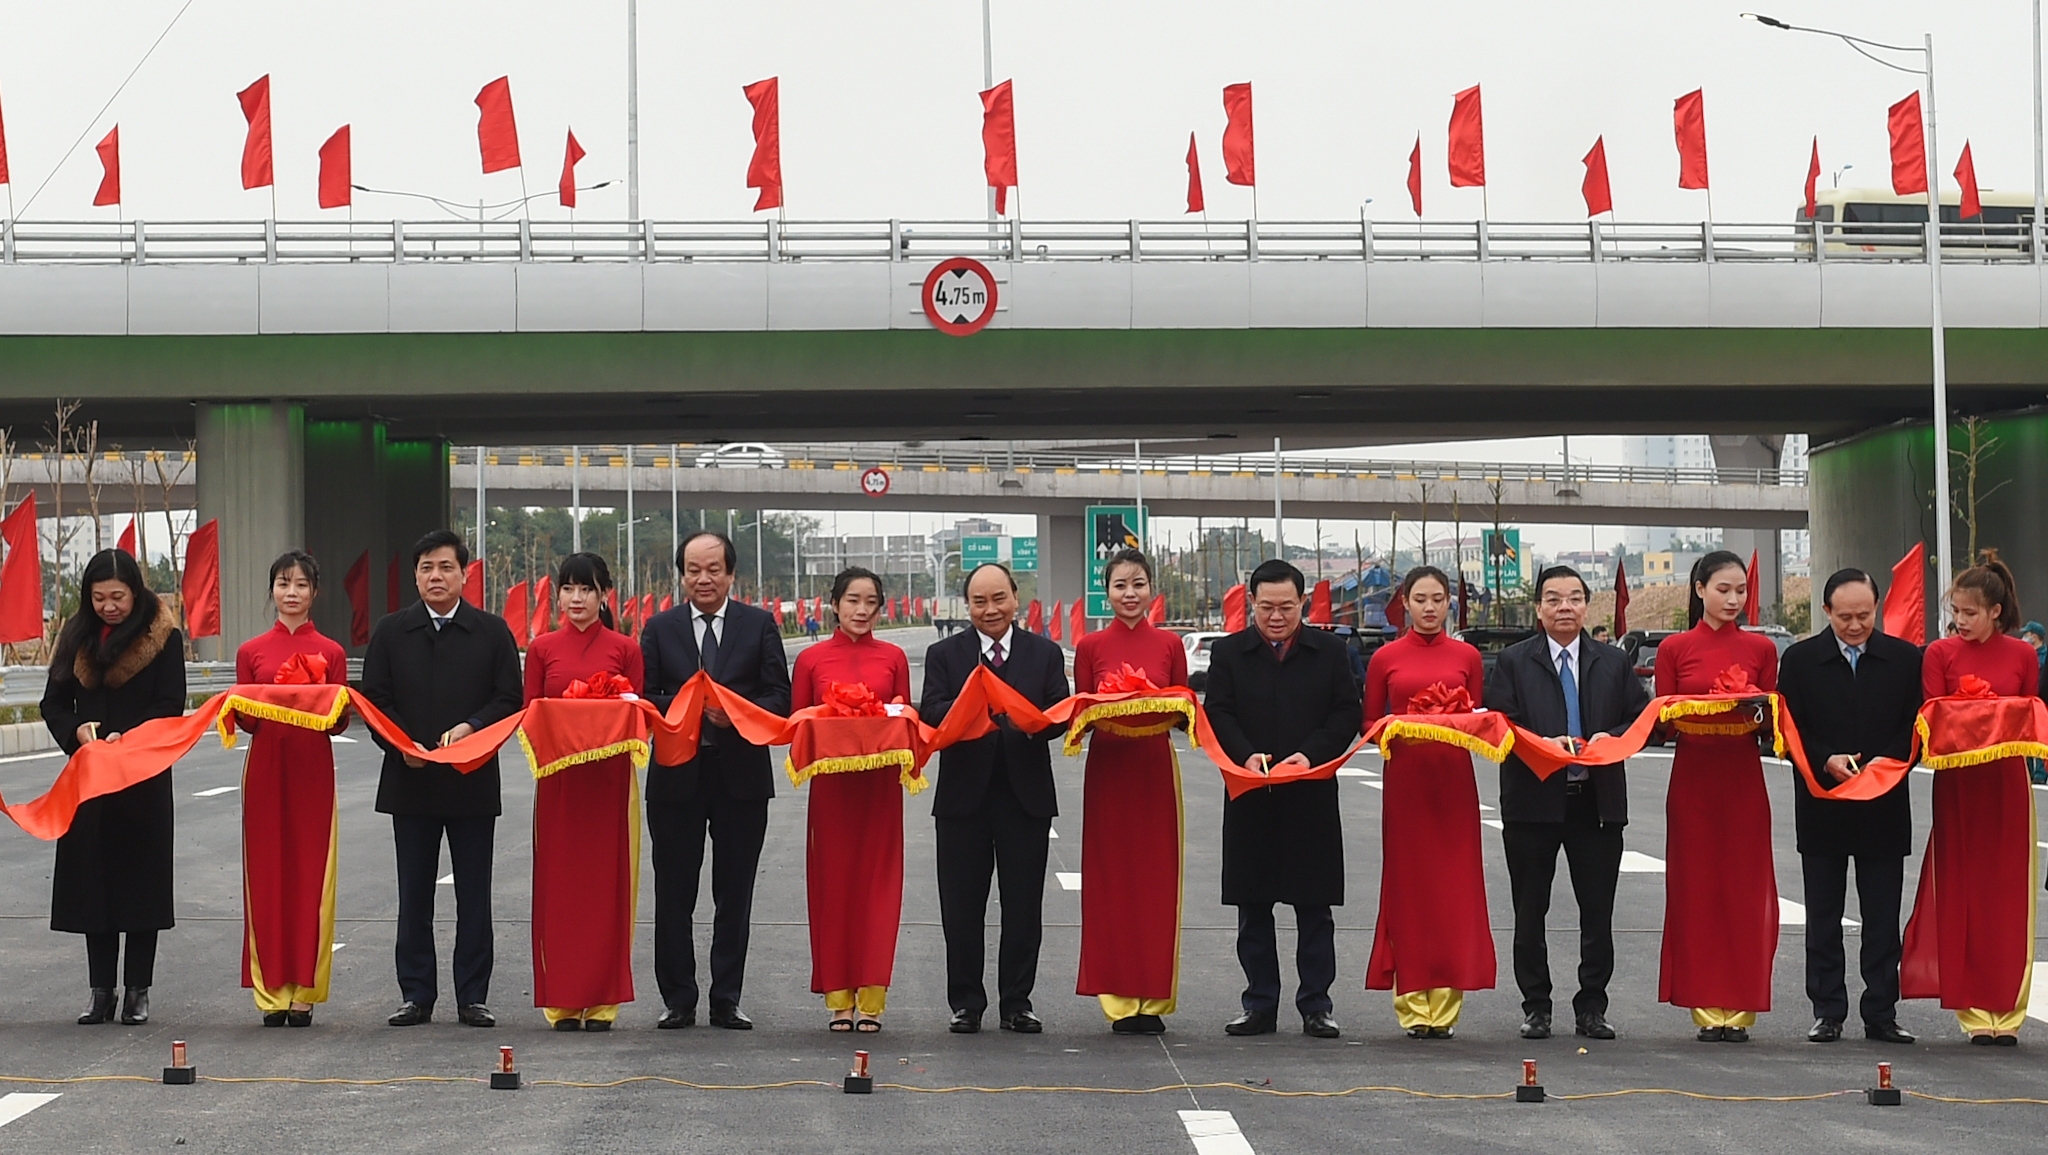 PM Nguyen Xuan Phuc attends the inauguration ceremony for the interchange. (Photo: VGP).